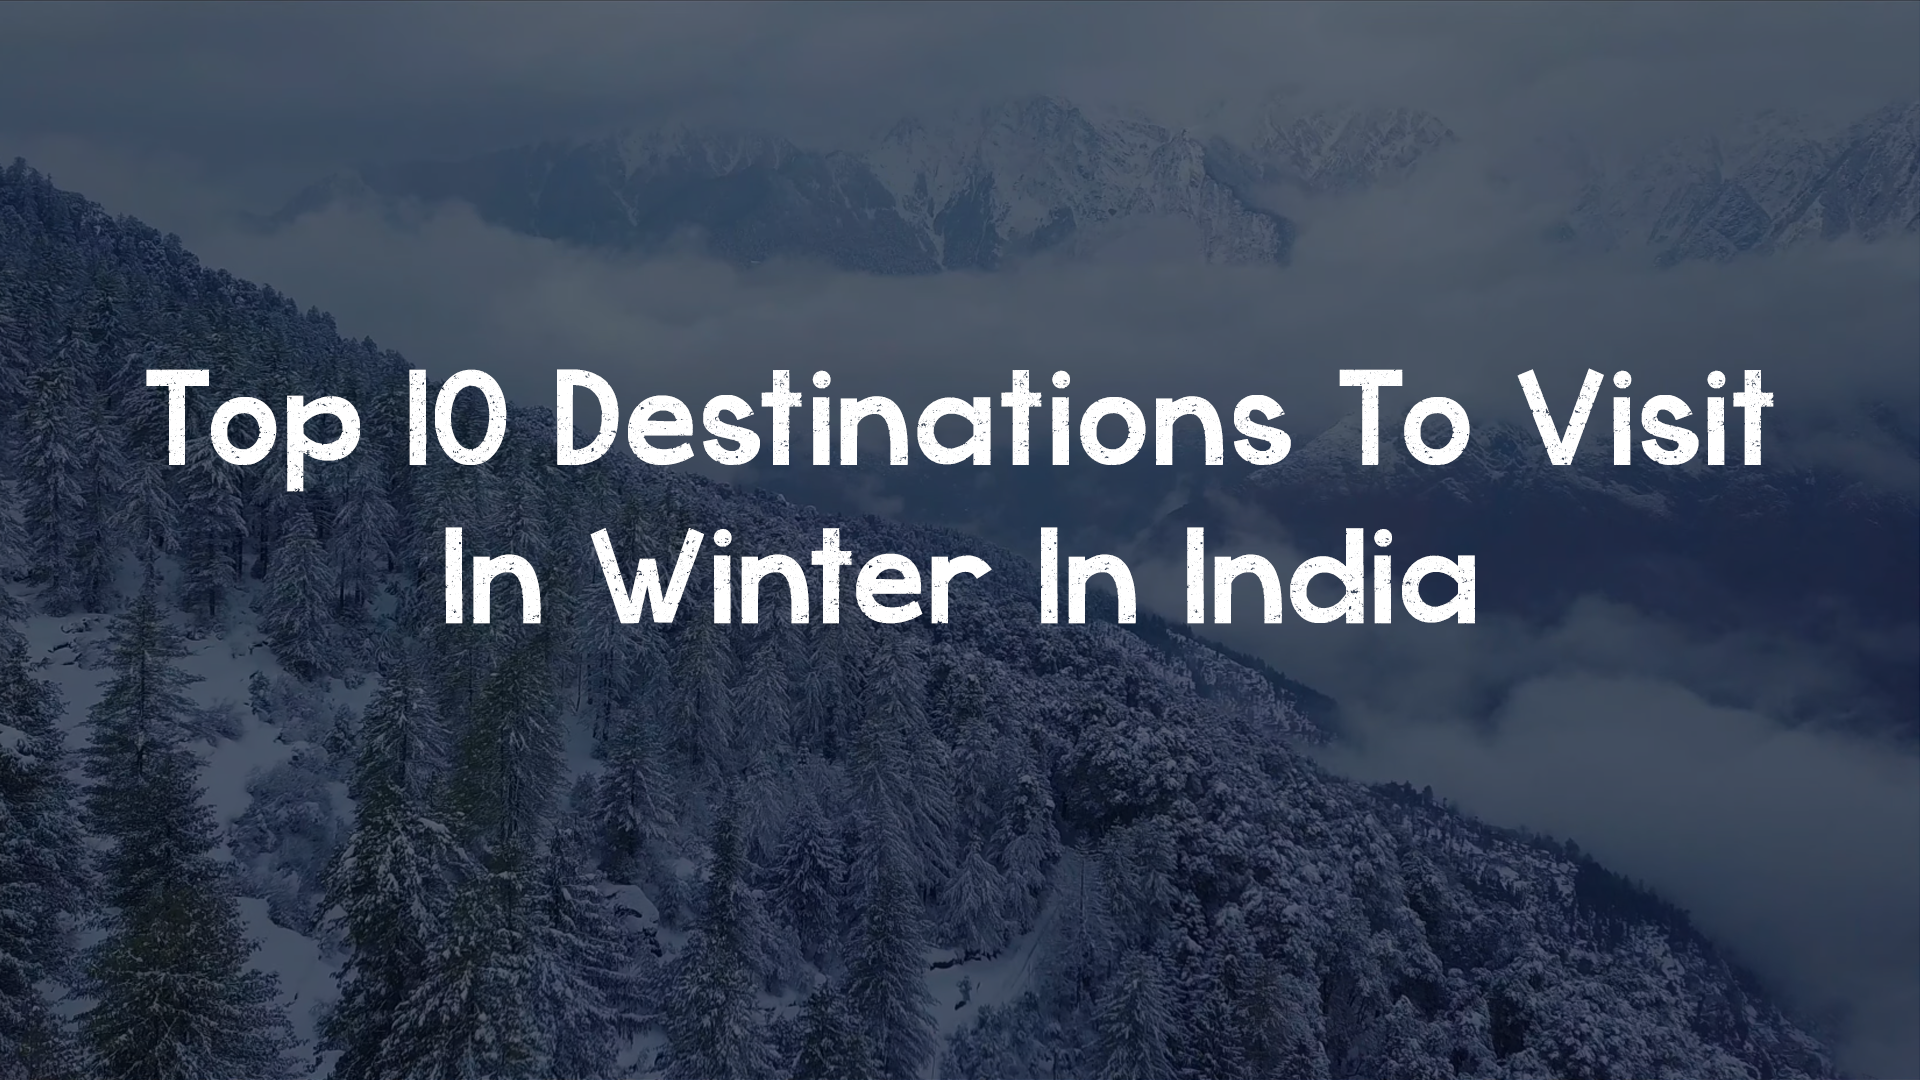 Destinations to visit in india during winter